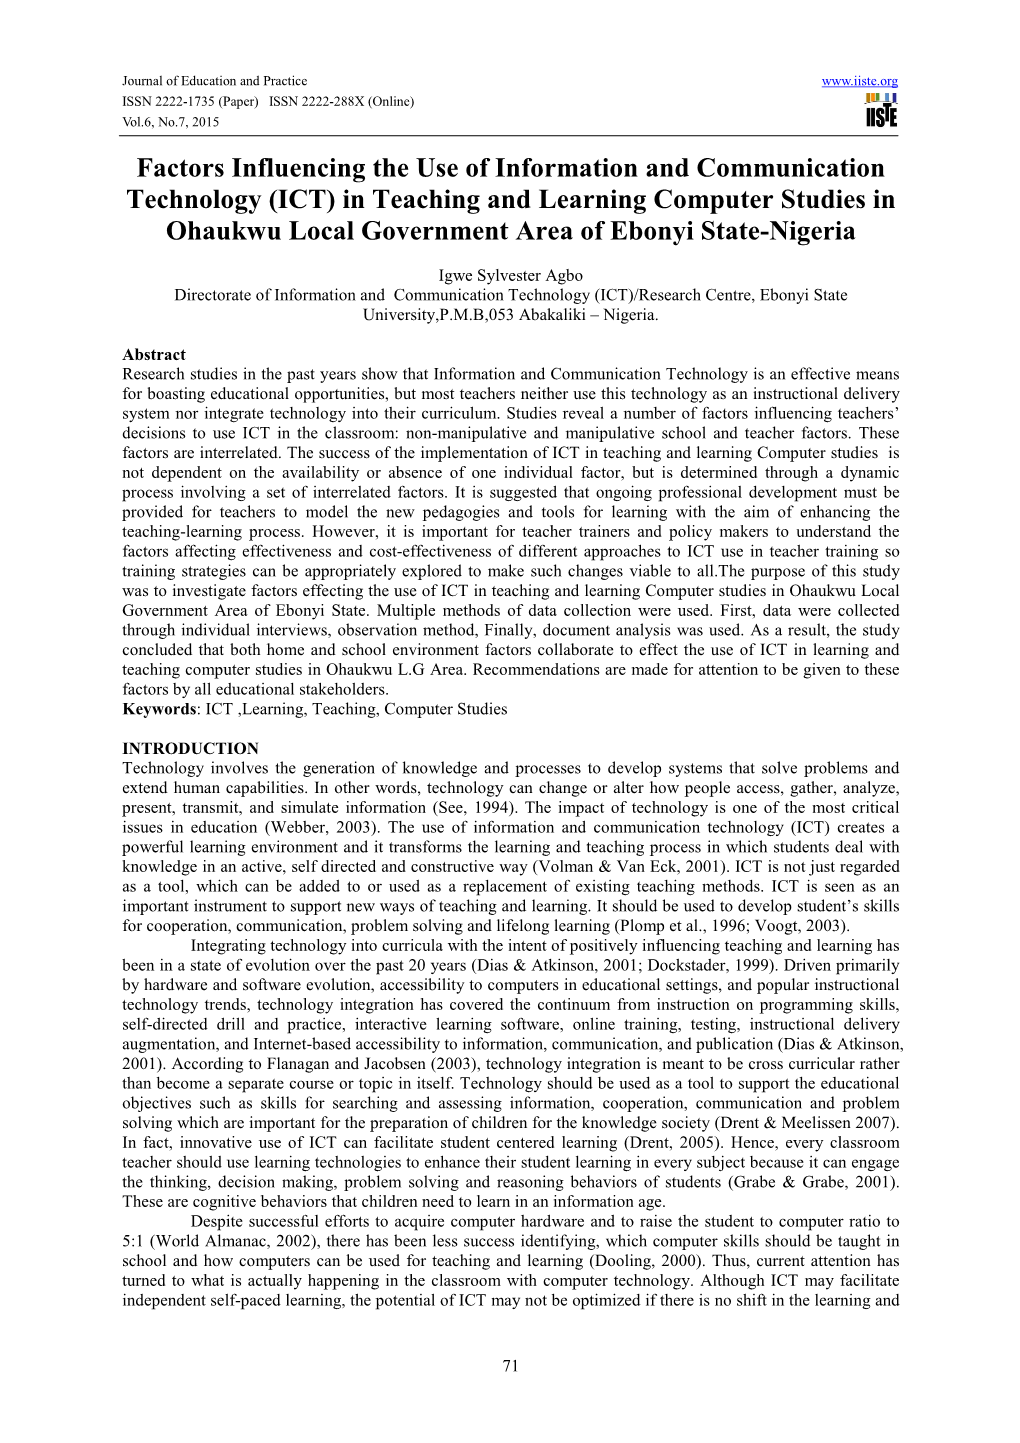 (ICT) in Teaching and Learning Computer Studies in Ohaukwu Local Government Area of Ebonyi State-Nigeria